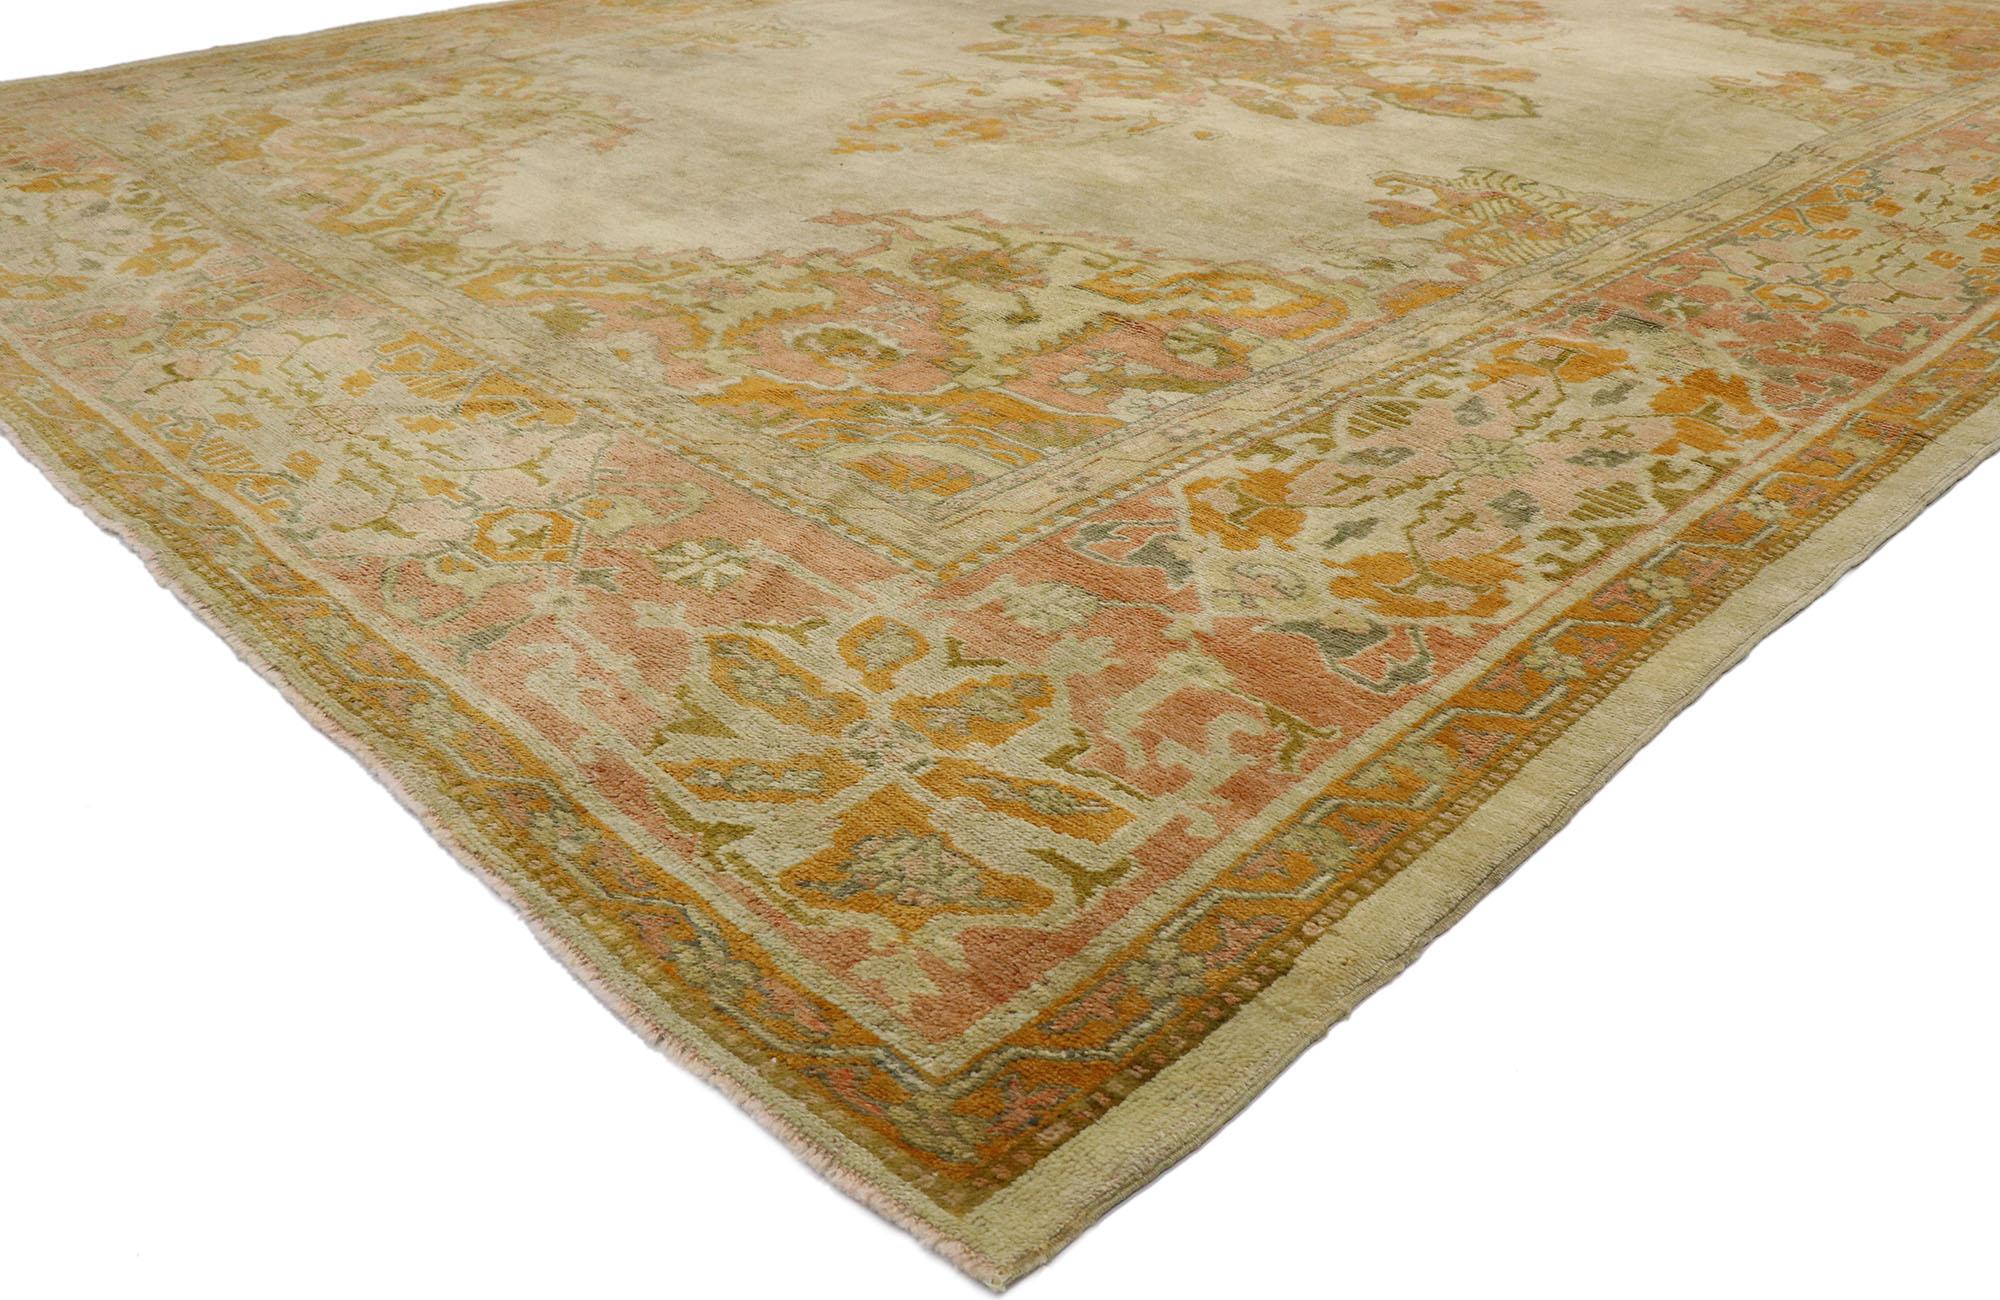 53390, distressed antique Turkish Oushak rug with Rustic Arts & Crafts style. With rustic charm and timeless appeal in an earthy-inspired colorway, this distressed antique Turkish Oushak rug will take on a curated lived-in look that feels timeless